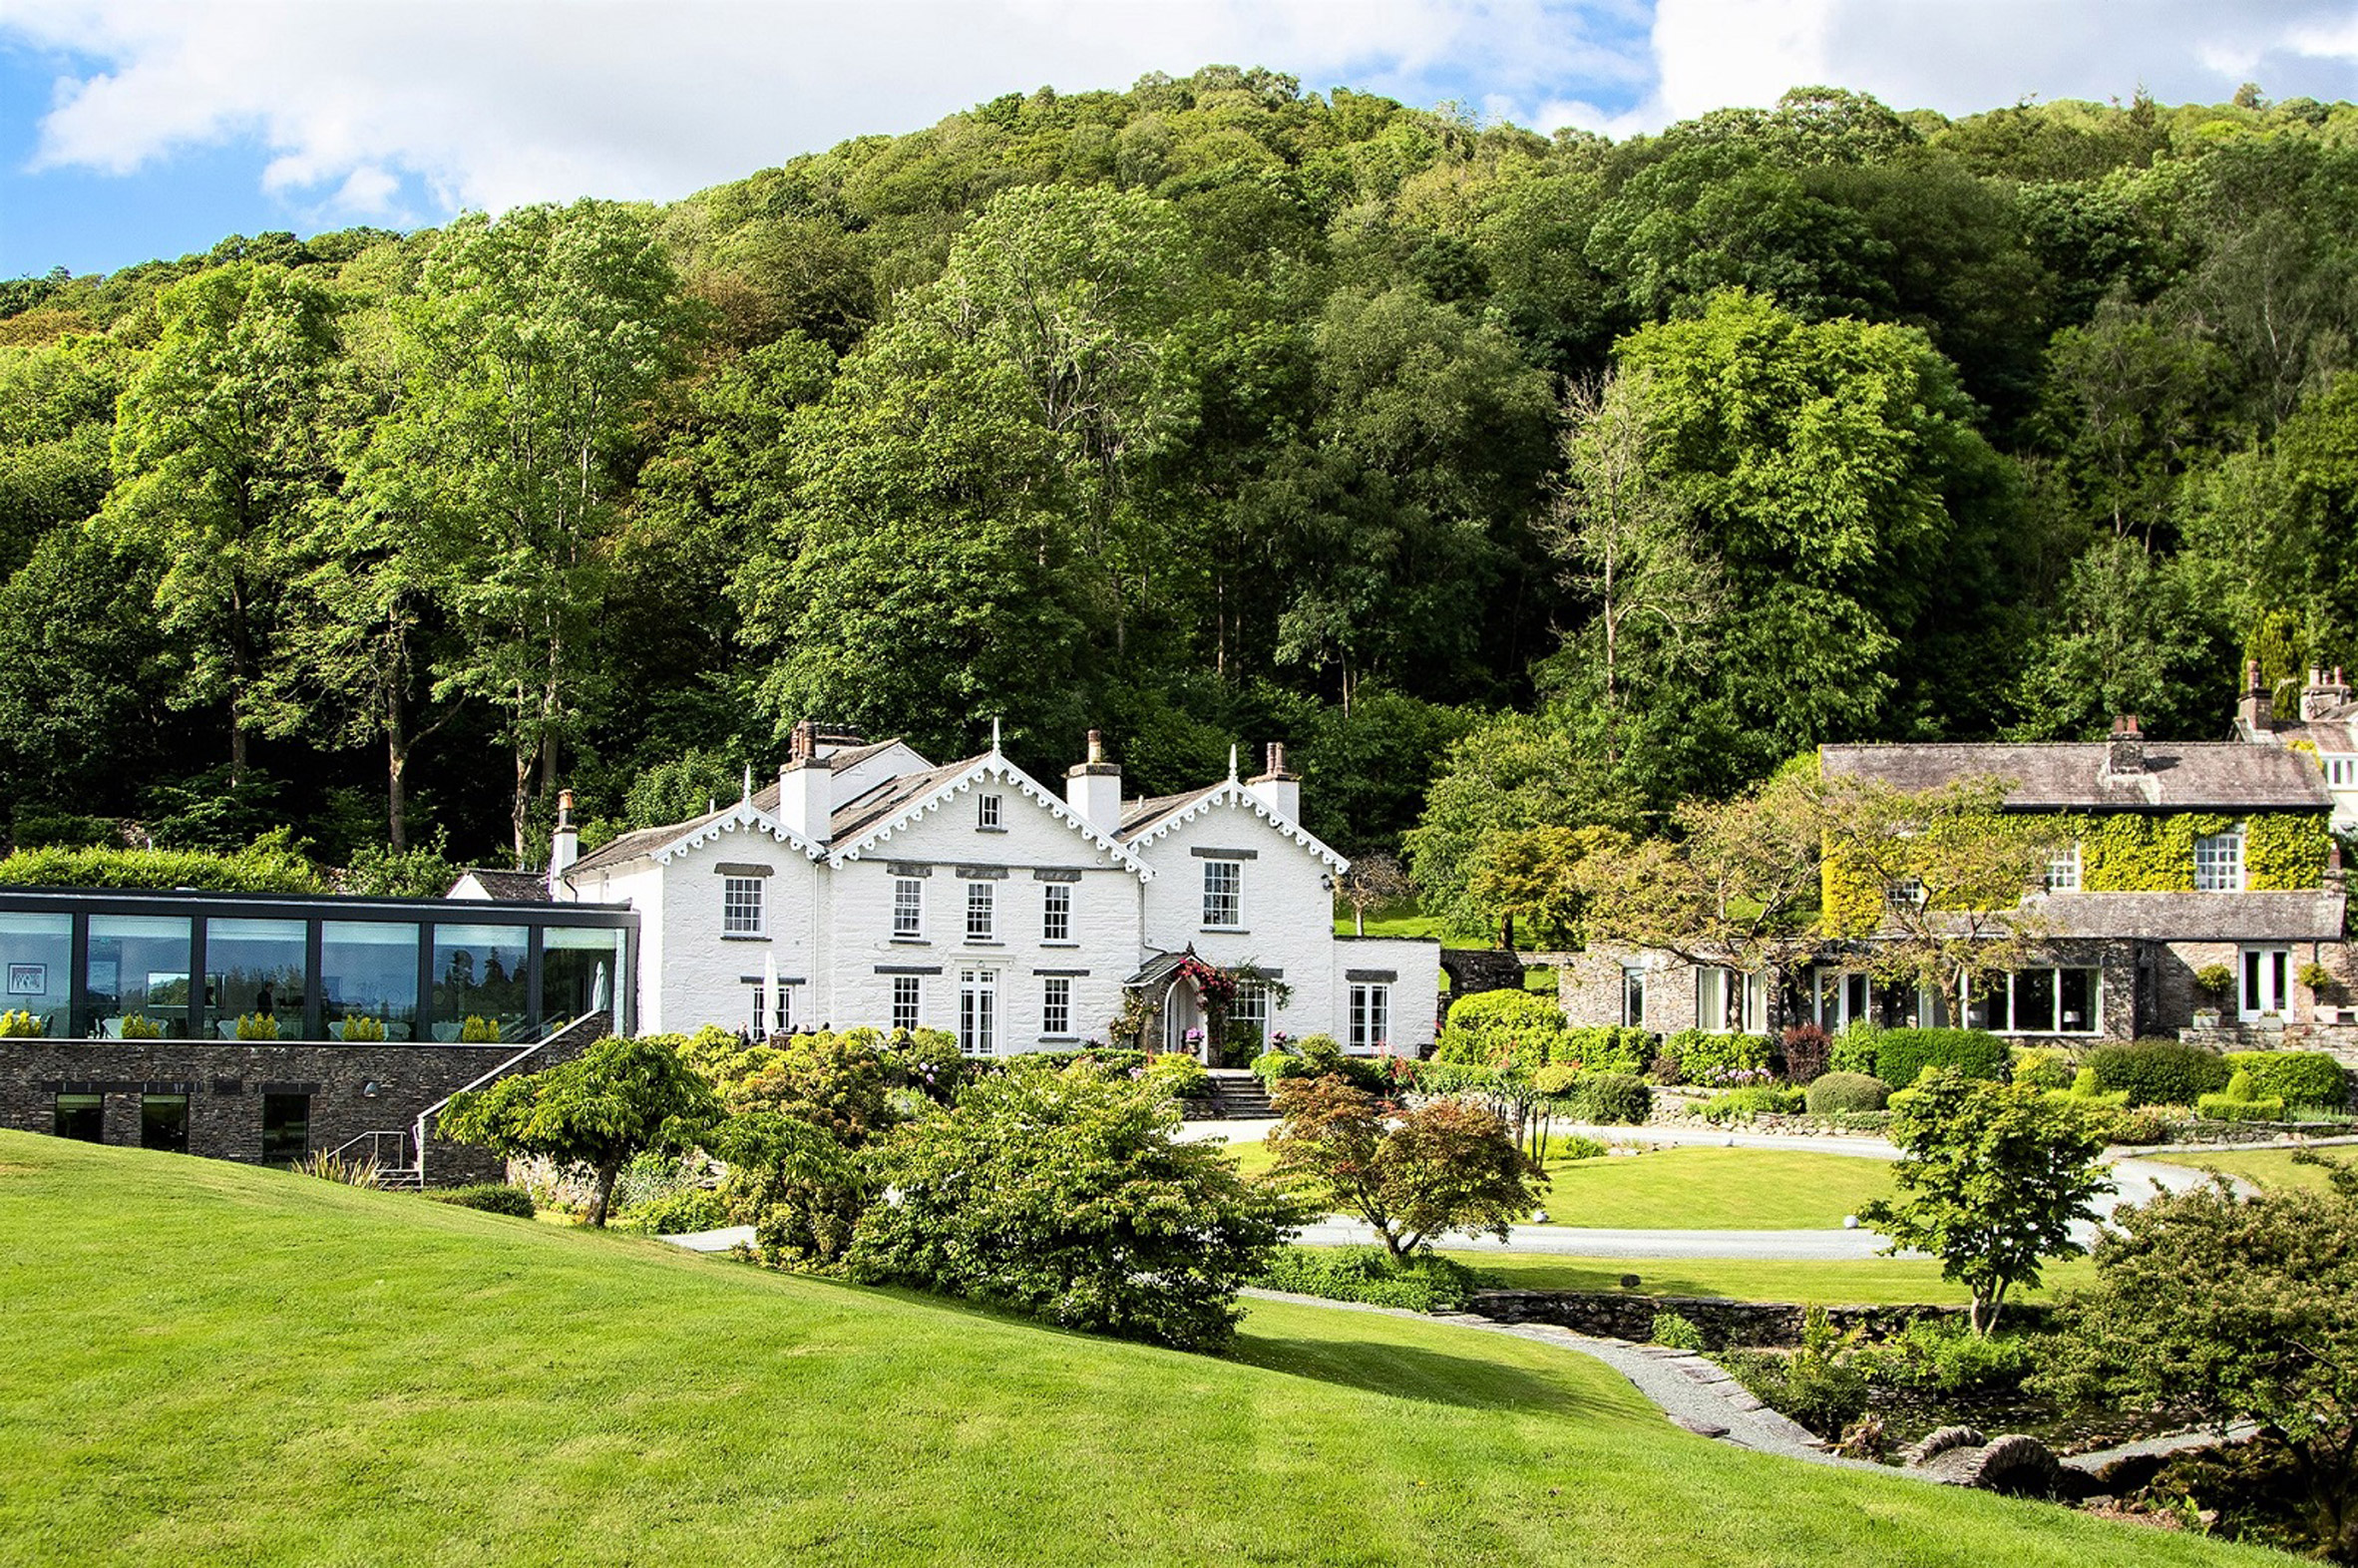 Samling Hotel in the Lake District competition